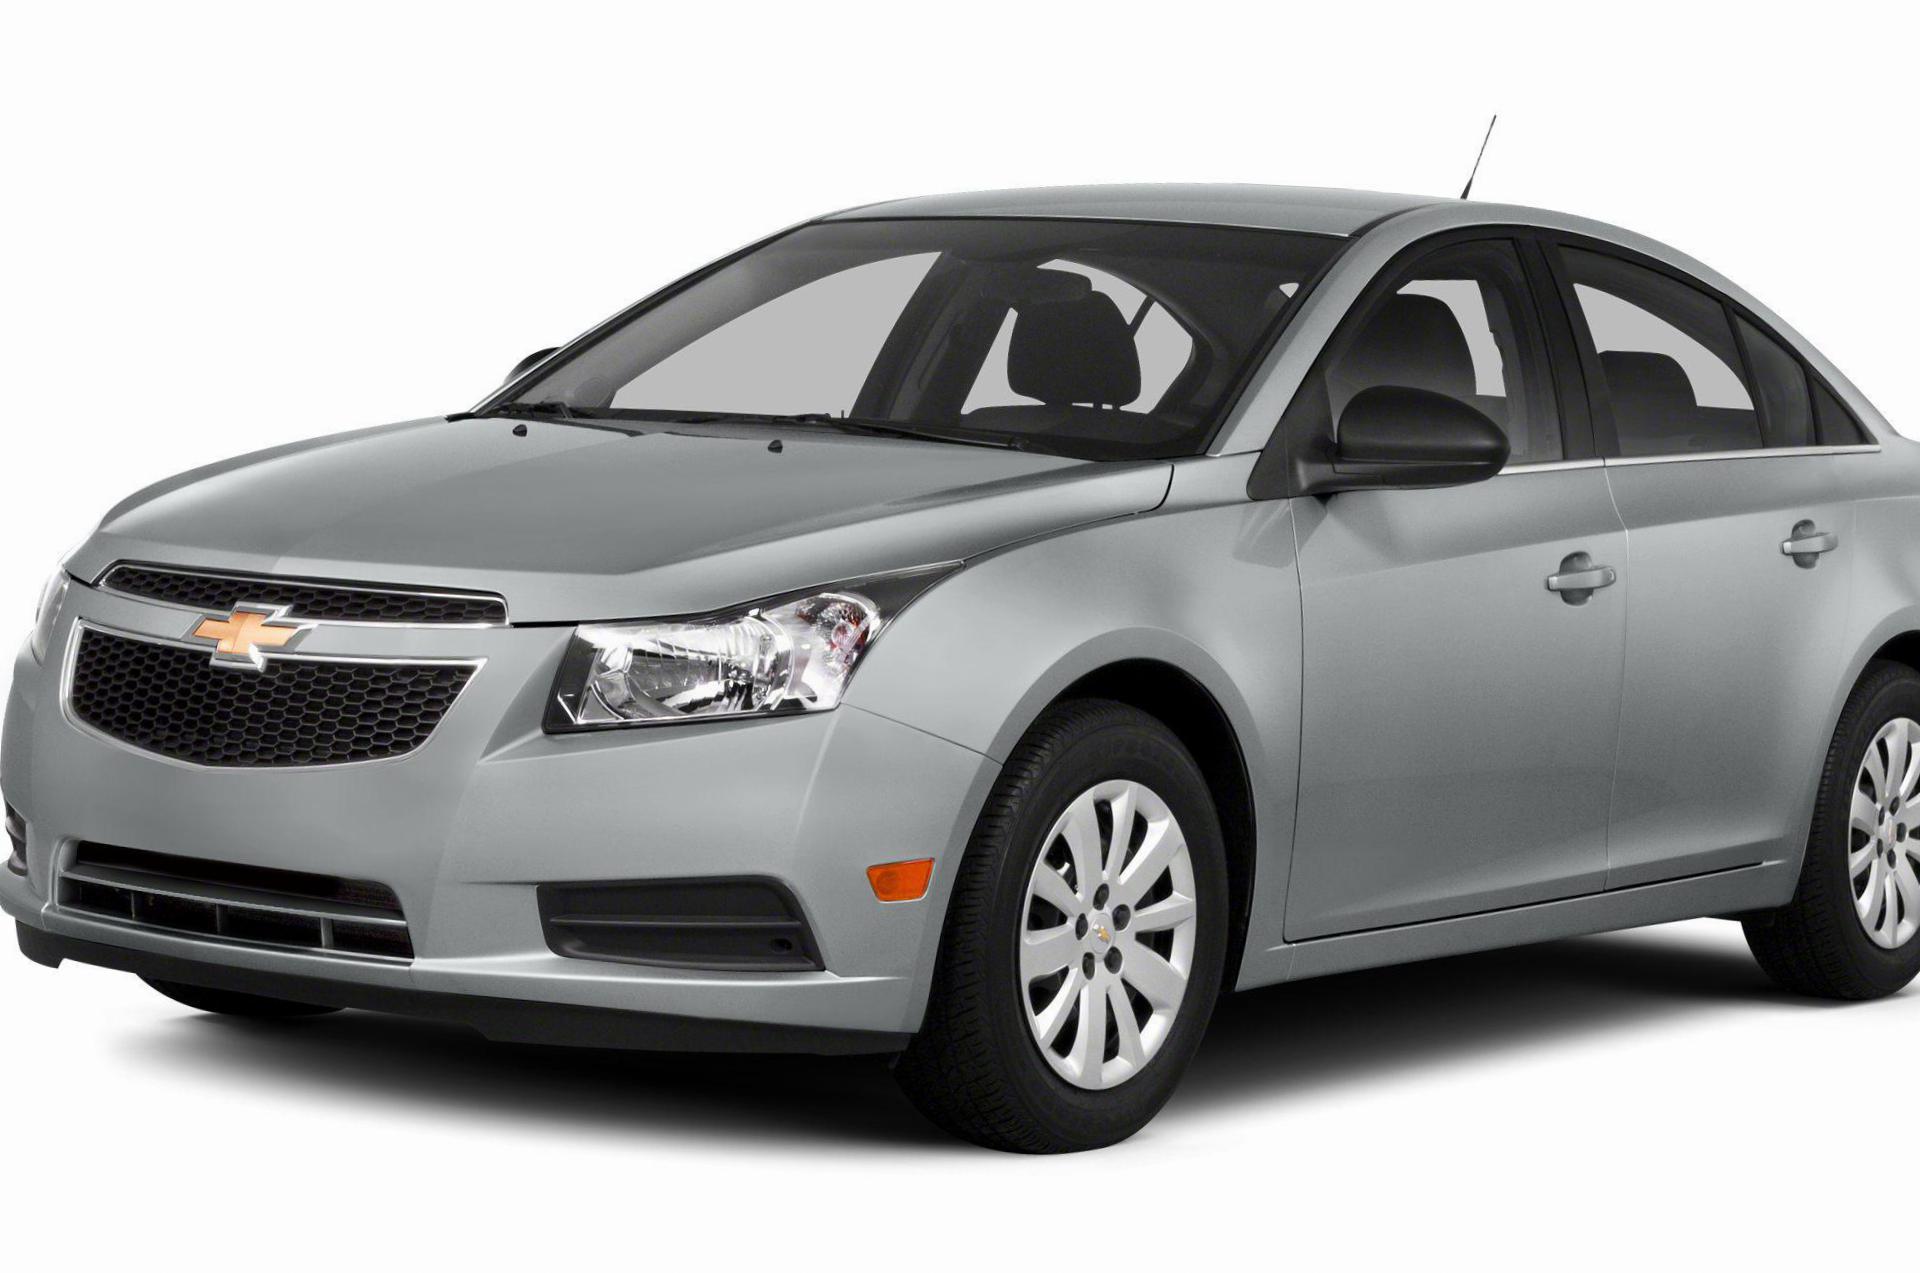 Cruze Chevrolet approved 2009